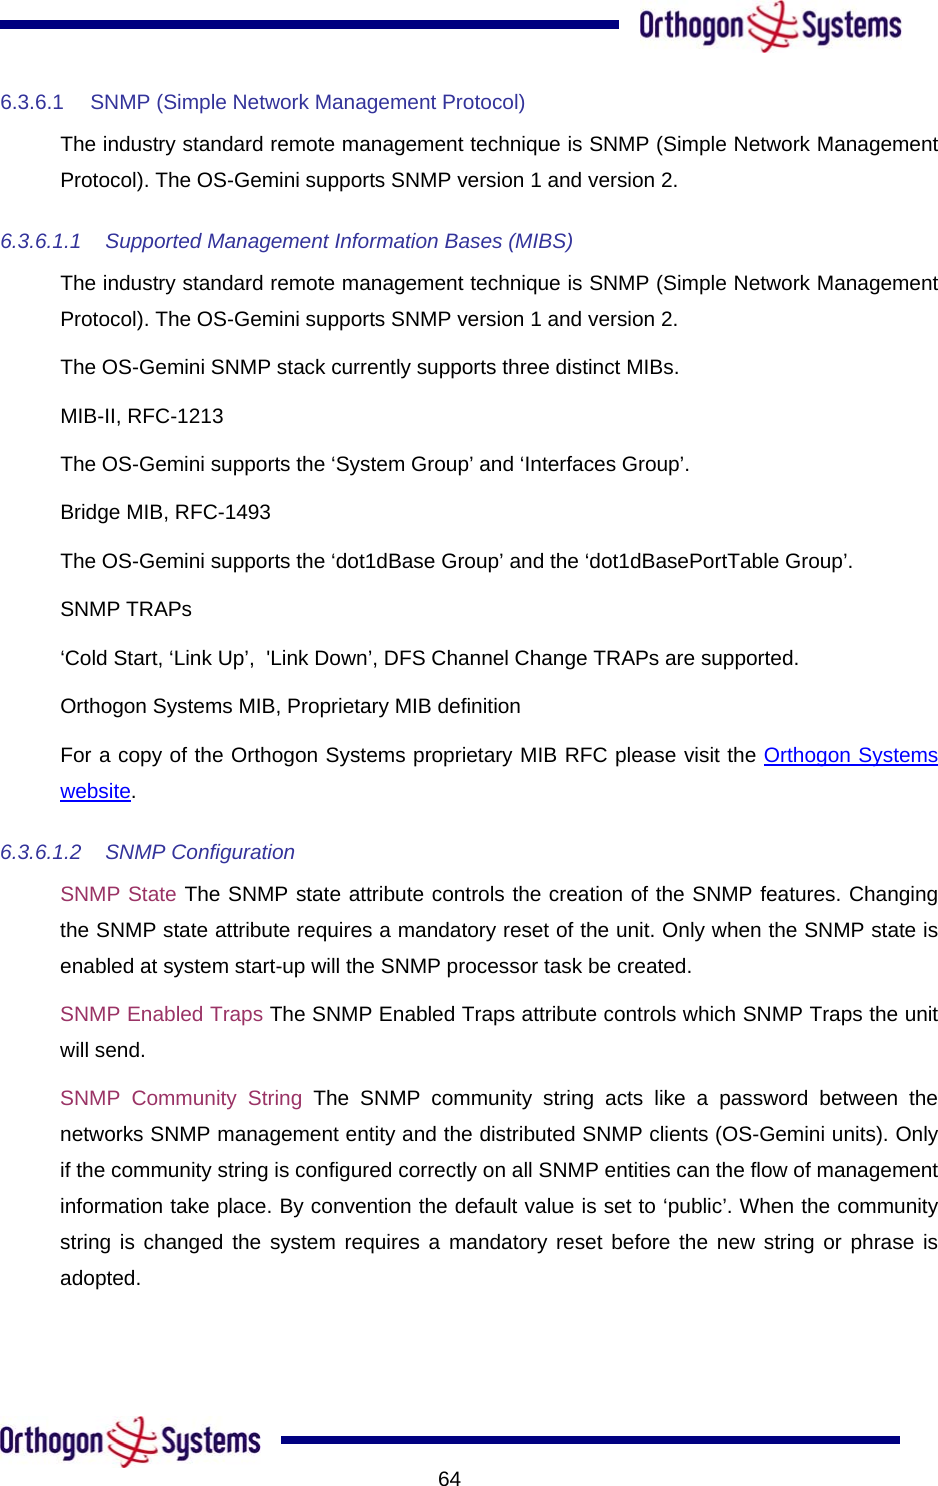           646.3.6.1  SNMP (Simple Network Management Protocol) The industry standard remote management technique is SNMP (Simple Network Management Protocol). The OS-Gemini supports SNMP version 1 and version 2. 6.3.6.1.1 Supported Management Information Bases (MIBS) The industry standard remote management technique is SNMP (Simple Network Management Protocol). The OS-Gemini supports SNMP version 1 and version 2. The OS-Gemini SNMP stack currently supports three distinct MIBs. MIB-II, RFC-1213 The OS-Gemini supports the ‘System Group’ and ‘Interfaces Group’. Bridge MIB, RFC-1493 The OS-Gemini supports the ‘dot1dBase Group’ and the ‘dot1dBasePortTable Group’. SNMP TRAPs ‘Cold Start, ‘Link Up’,  &apos;Link Down’, DFS Channel Change TRAPs are supported. Orthogon Systems MIB, Proprietary MIB definition For a copy of the Orthogon Systems proprietary MIB RFC please visit the Orthogon Systems website. 6.3.6.1.2 SNMP Configuration SNMP State The SNMP state attribute controls the creation of the SNMP features. Changing the SNMP state attribute requires a mandatory reset of the unit. Only when the SNMP state is enabled at system start-up will the SNMP processor task be created. SNMP Enabled Traps The SNMP Enabled Traps attribute controls which SNMP Traps the unit will send. SNMP Community String The SNMP community string acts like a password between the networks SNMP management entity and the distributed SNMP clients (OS-Gemini units). Only if the community string is configured correctly on all SNMP entities can the flow of management information take place. By convention the default value is set to ‘public’. When the community string is changed the system requires a mandatory reset before the new string or phrase is adopted. 